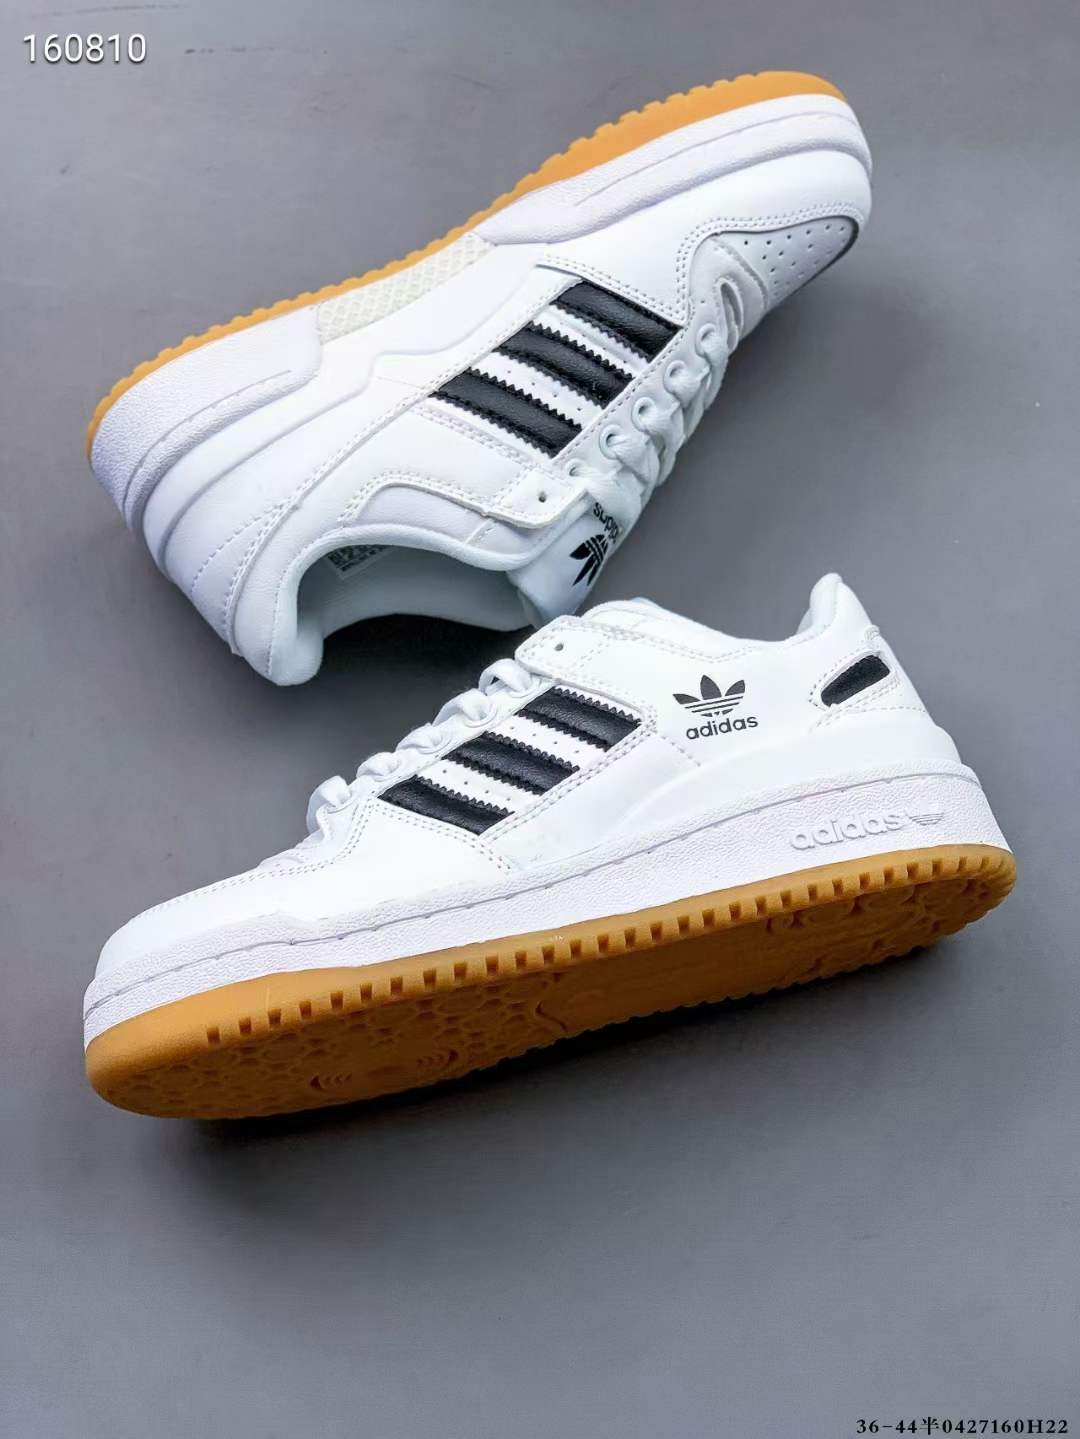 How the Adidas Superstar Shoes Became an Icon